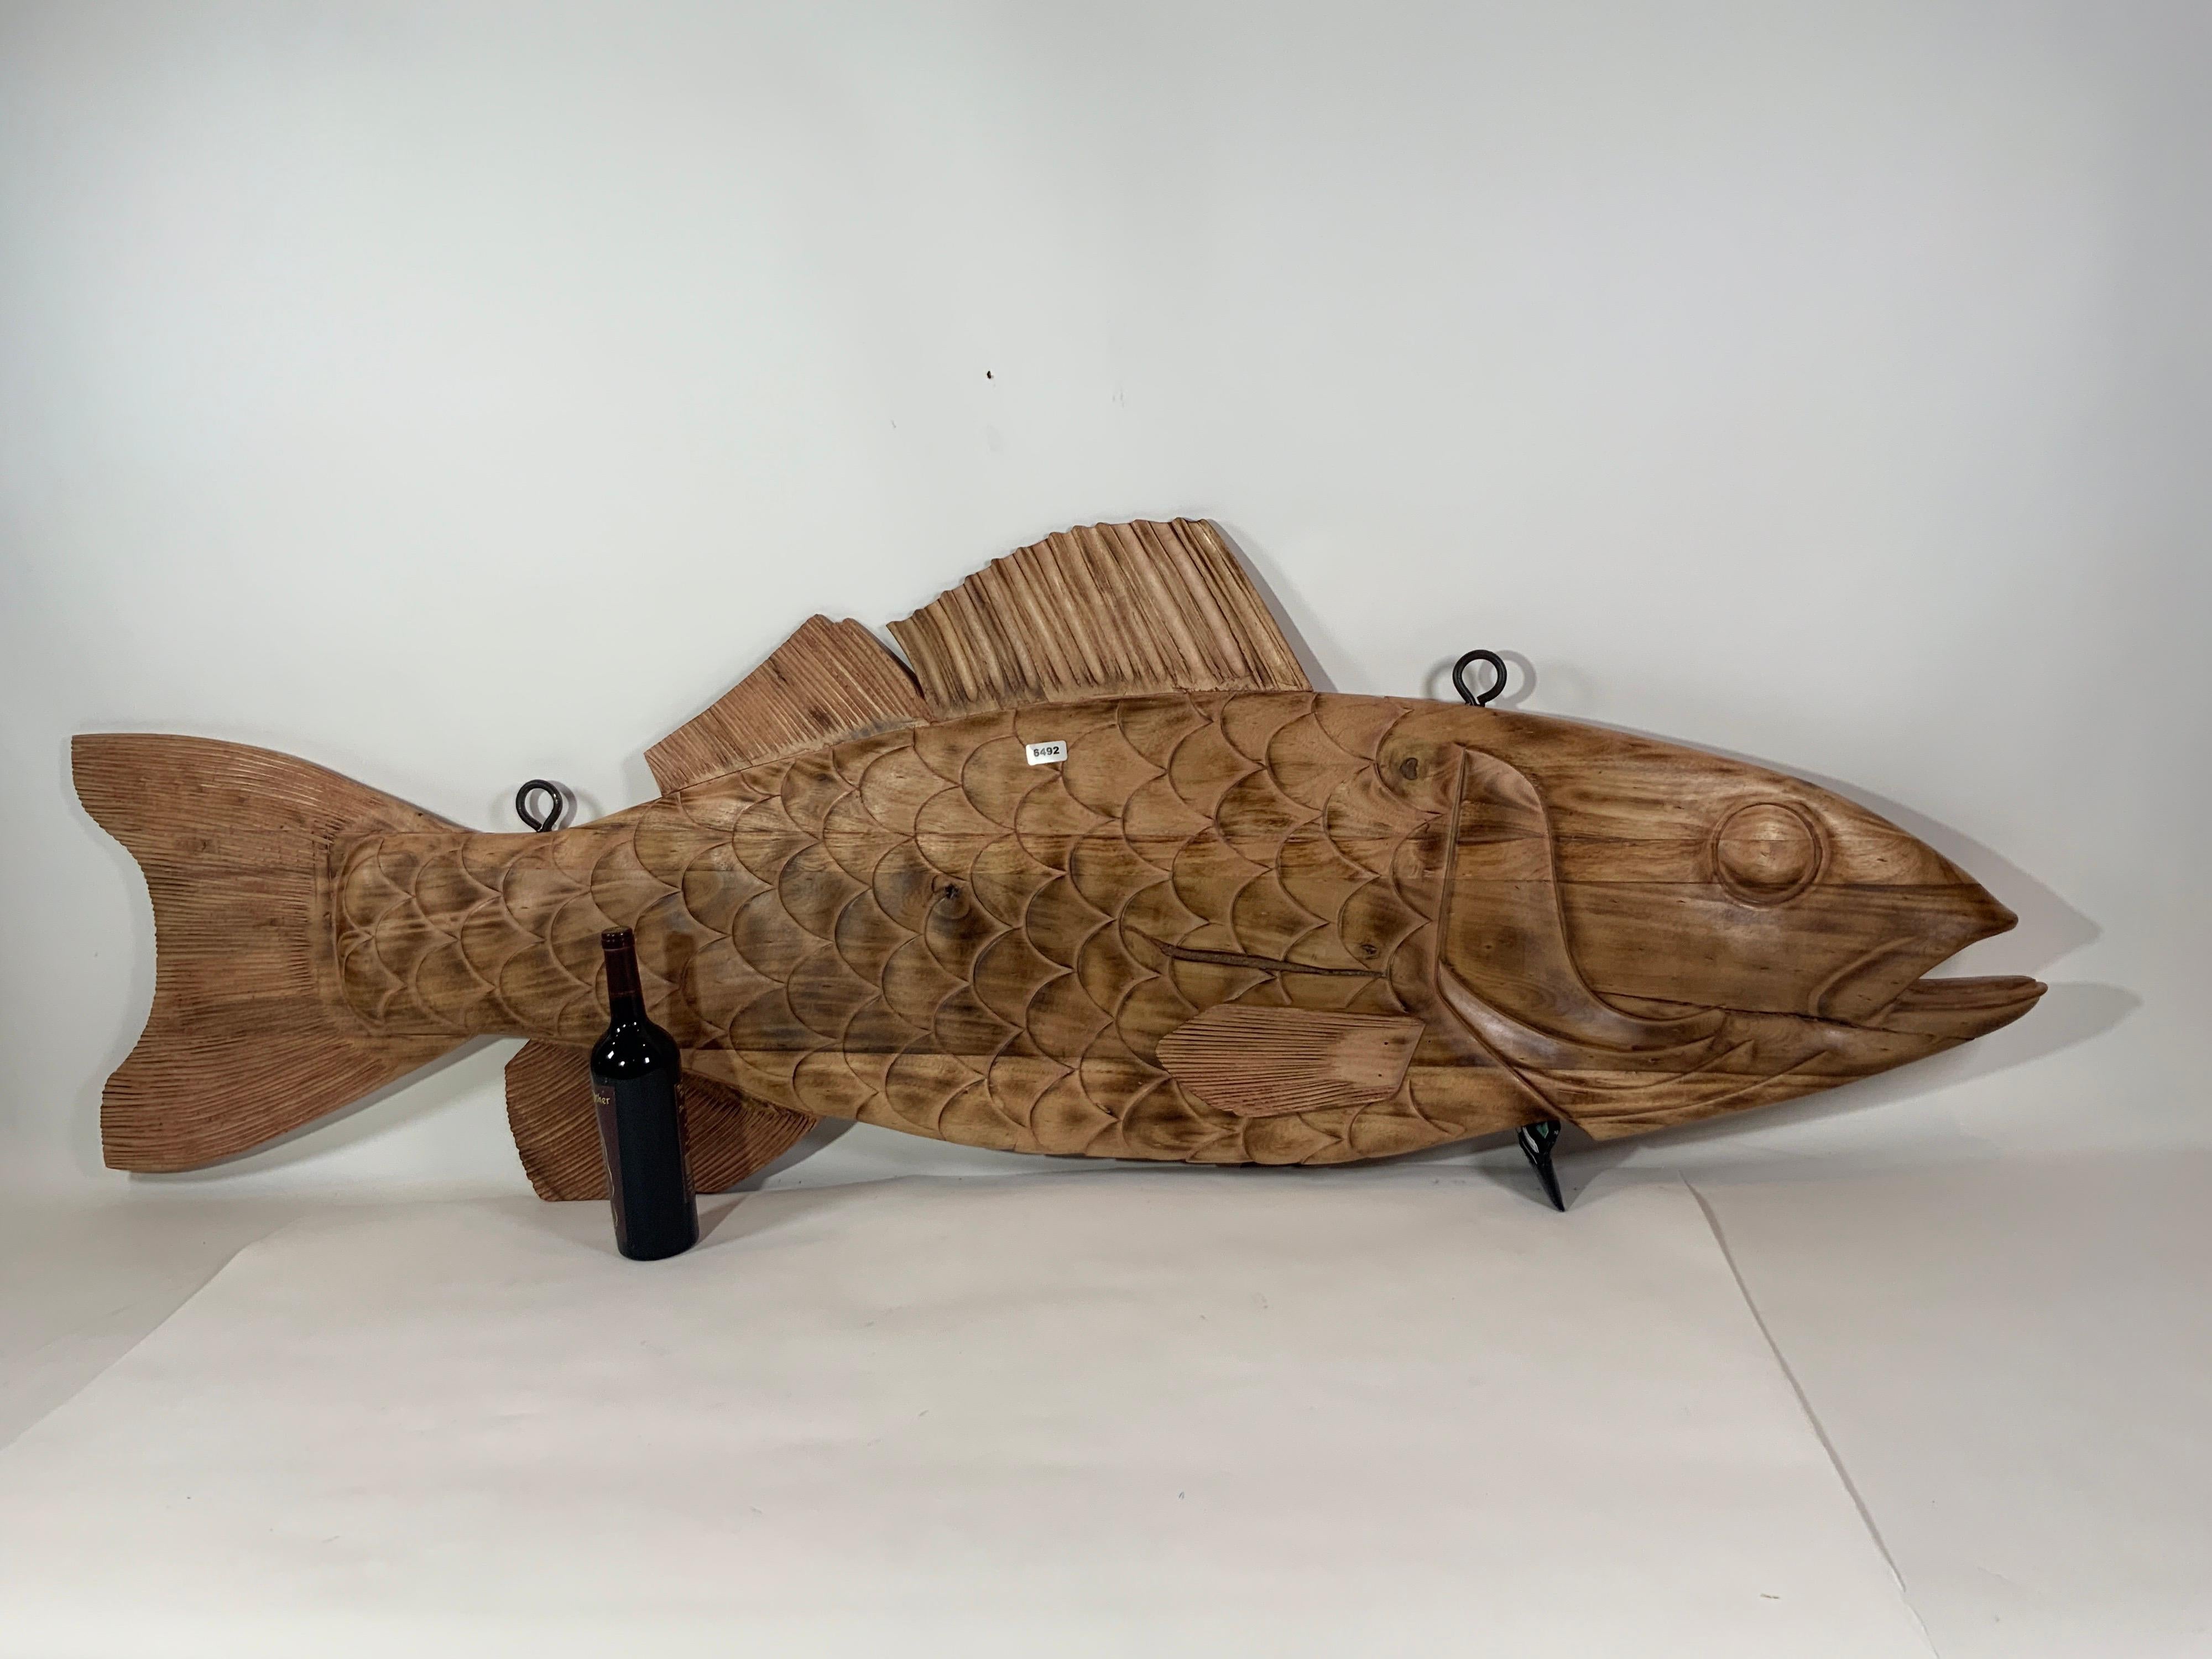 Six foot carved wood fish reminiscent of a nineteenth century trade sign. With carved gills, fins, scales, eyes and mouth. Fitted with iron hanging bolts, wax finish with flame accents.

Overall Dimensions: Weight is 45 pounds. 25